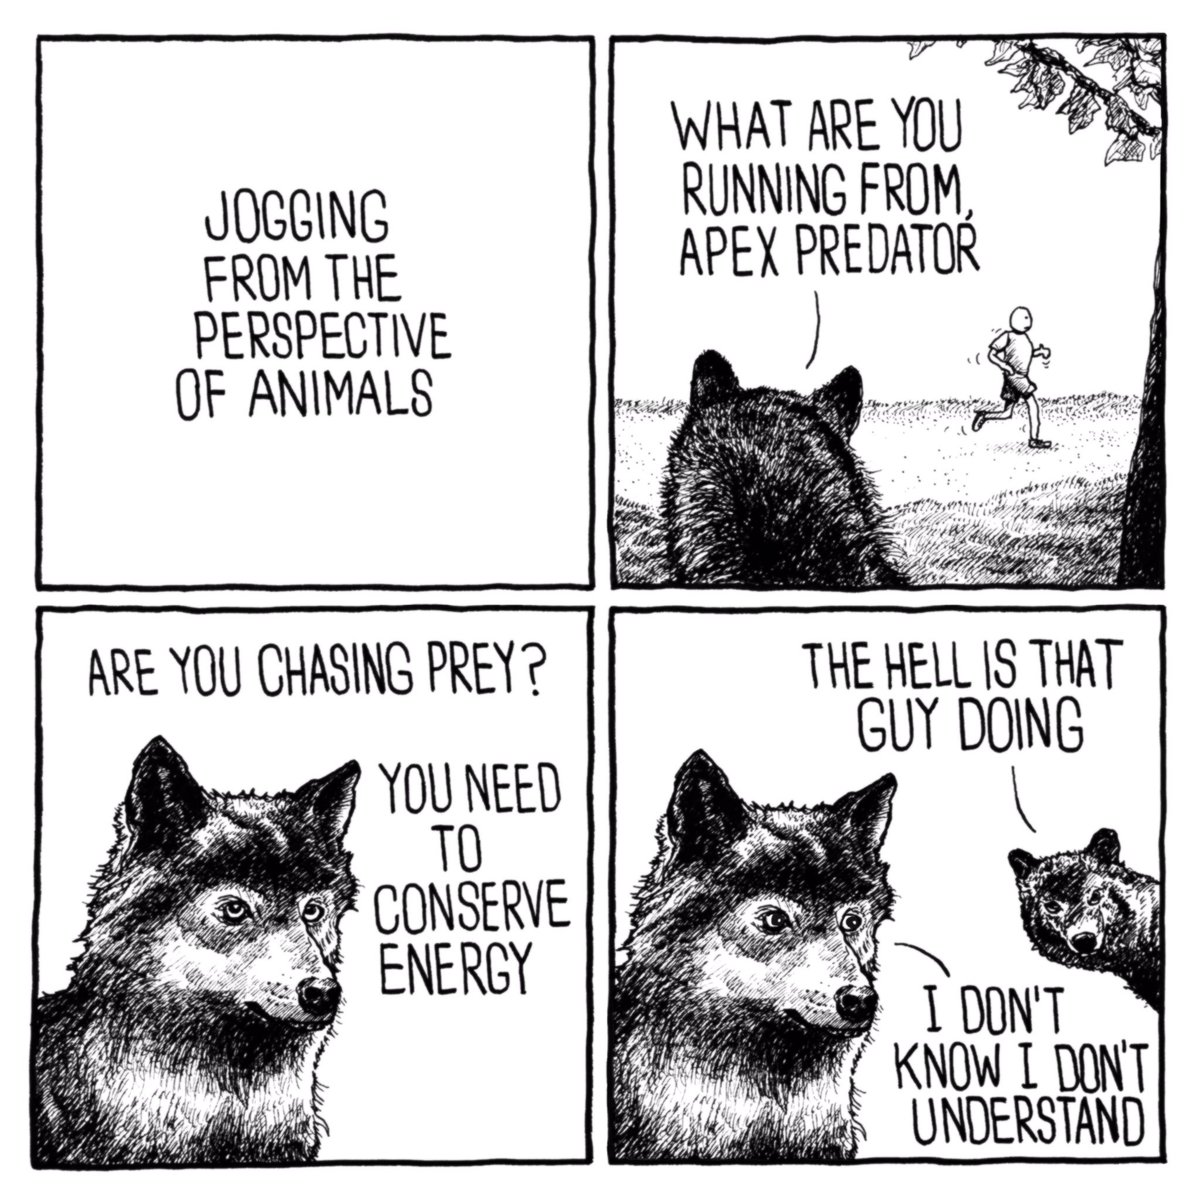 Jogging from the Perspective of Animals